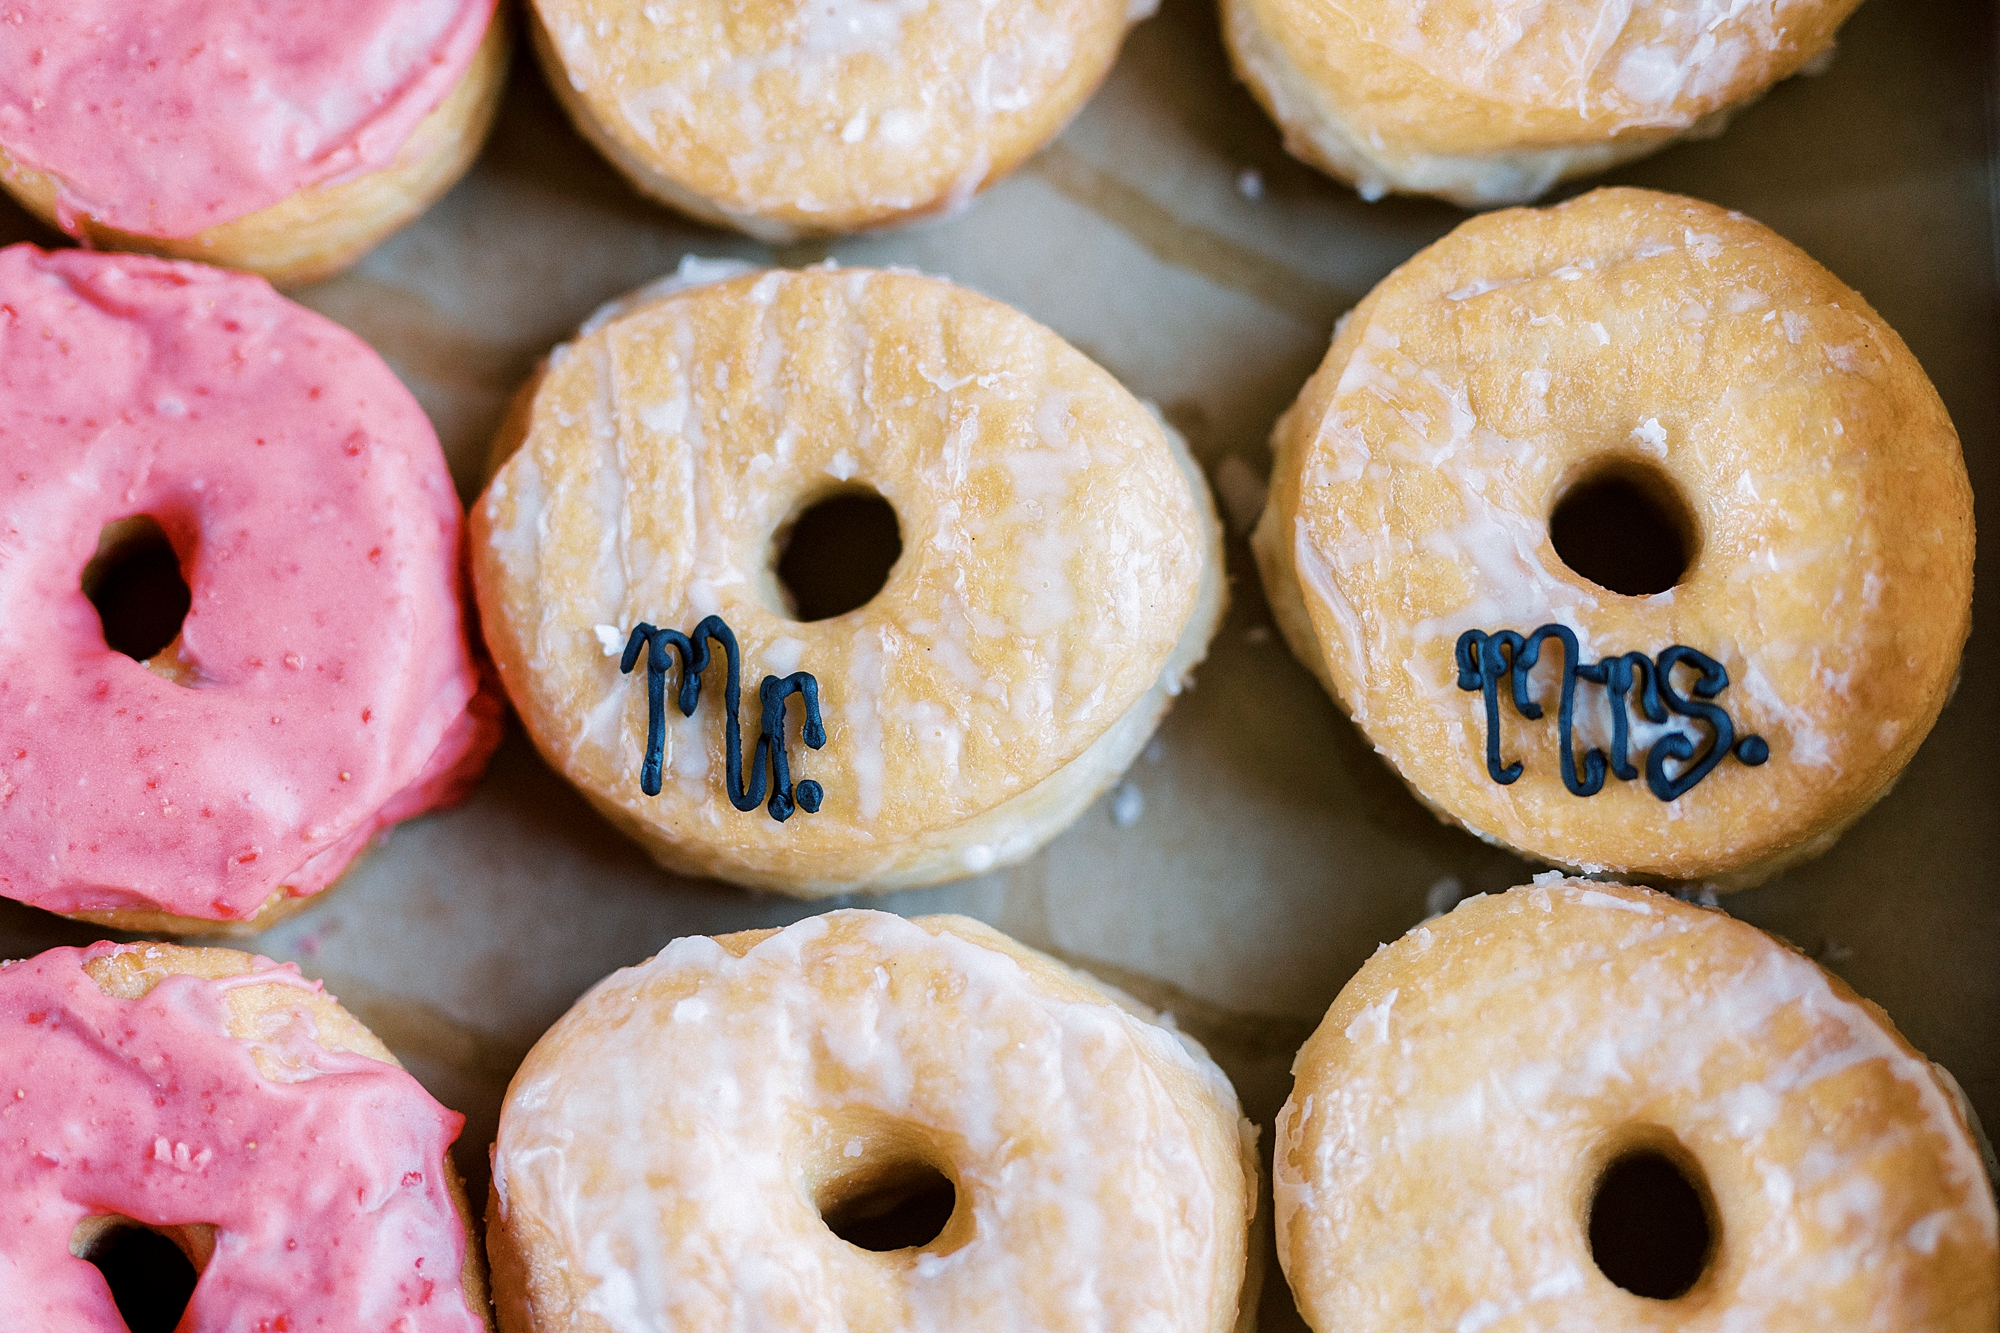 custom donuts for early morning wedding on Morrow Mountain